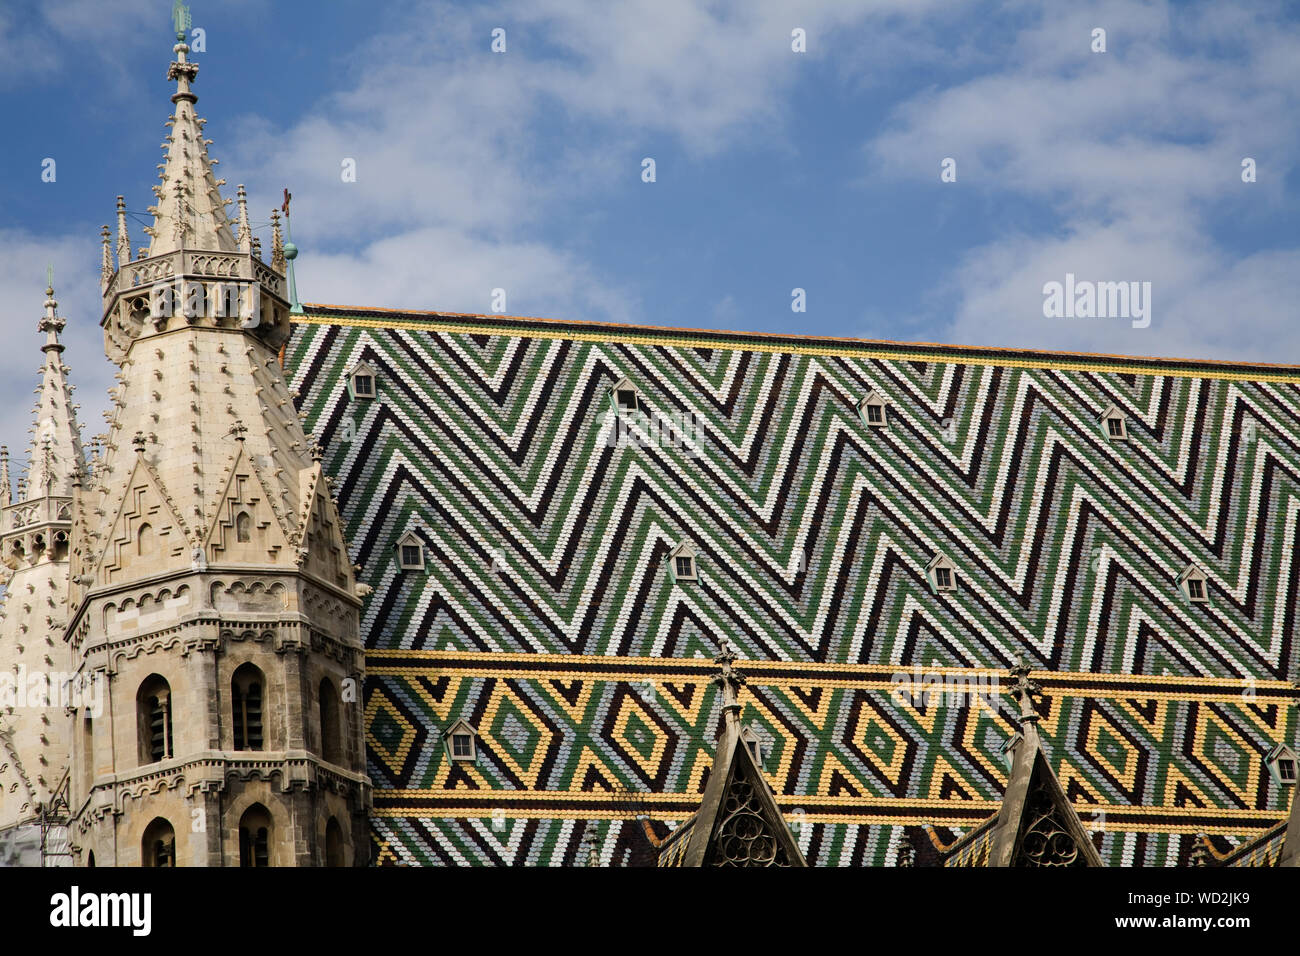 The multi-coloured geometric roof of St. Stephens Cathedral (Stephansdom) in the centre of Vienna Austria. Stock Photo